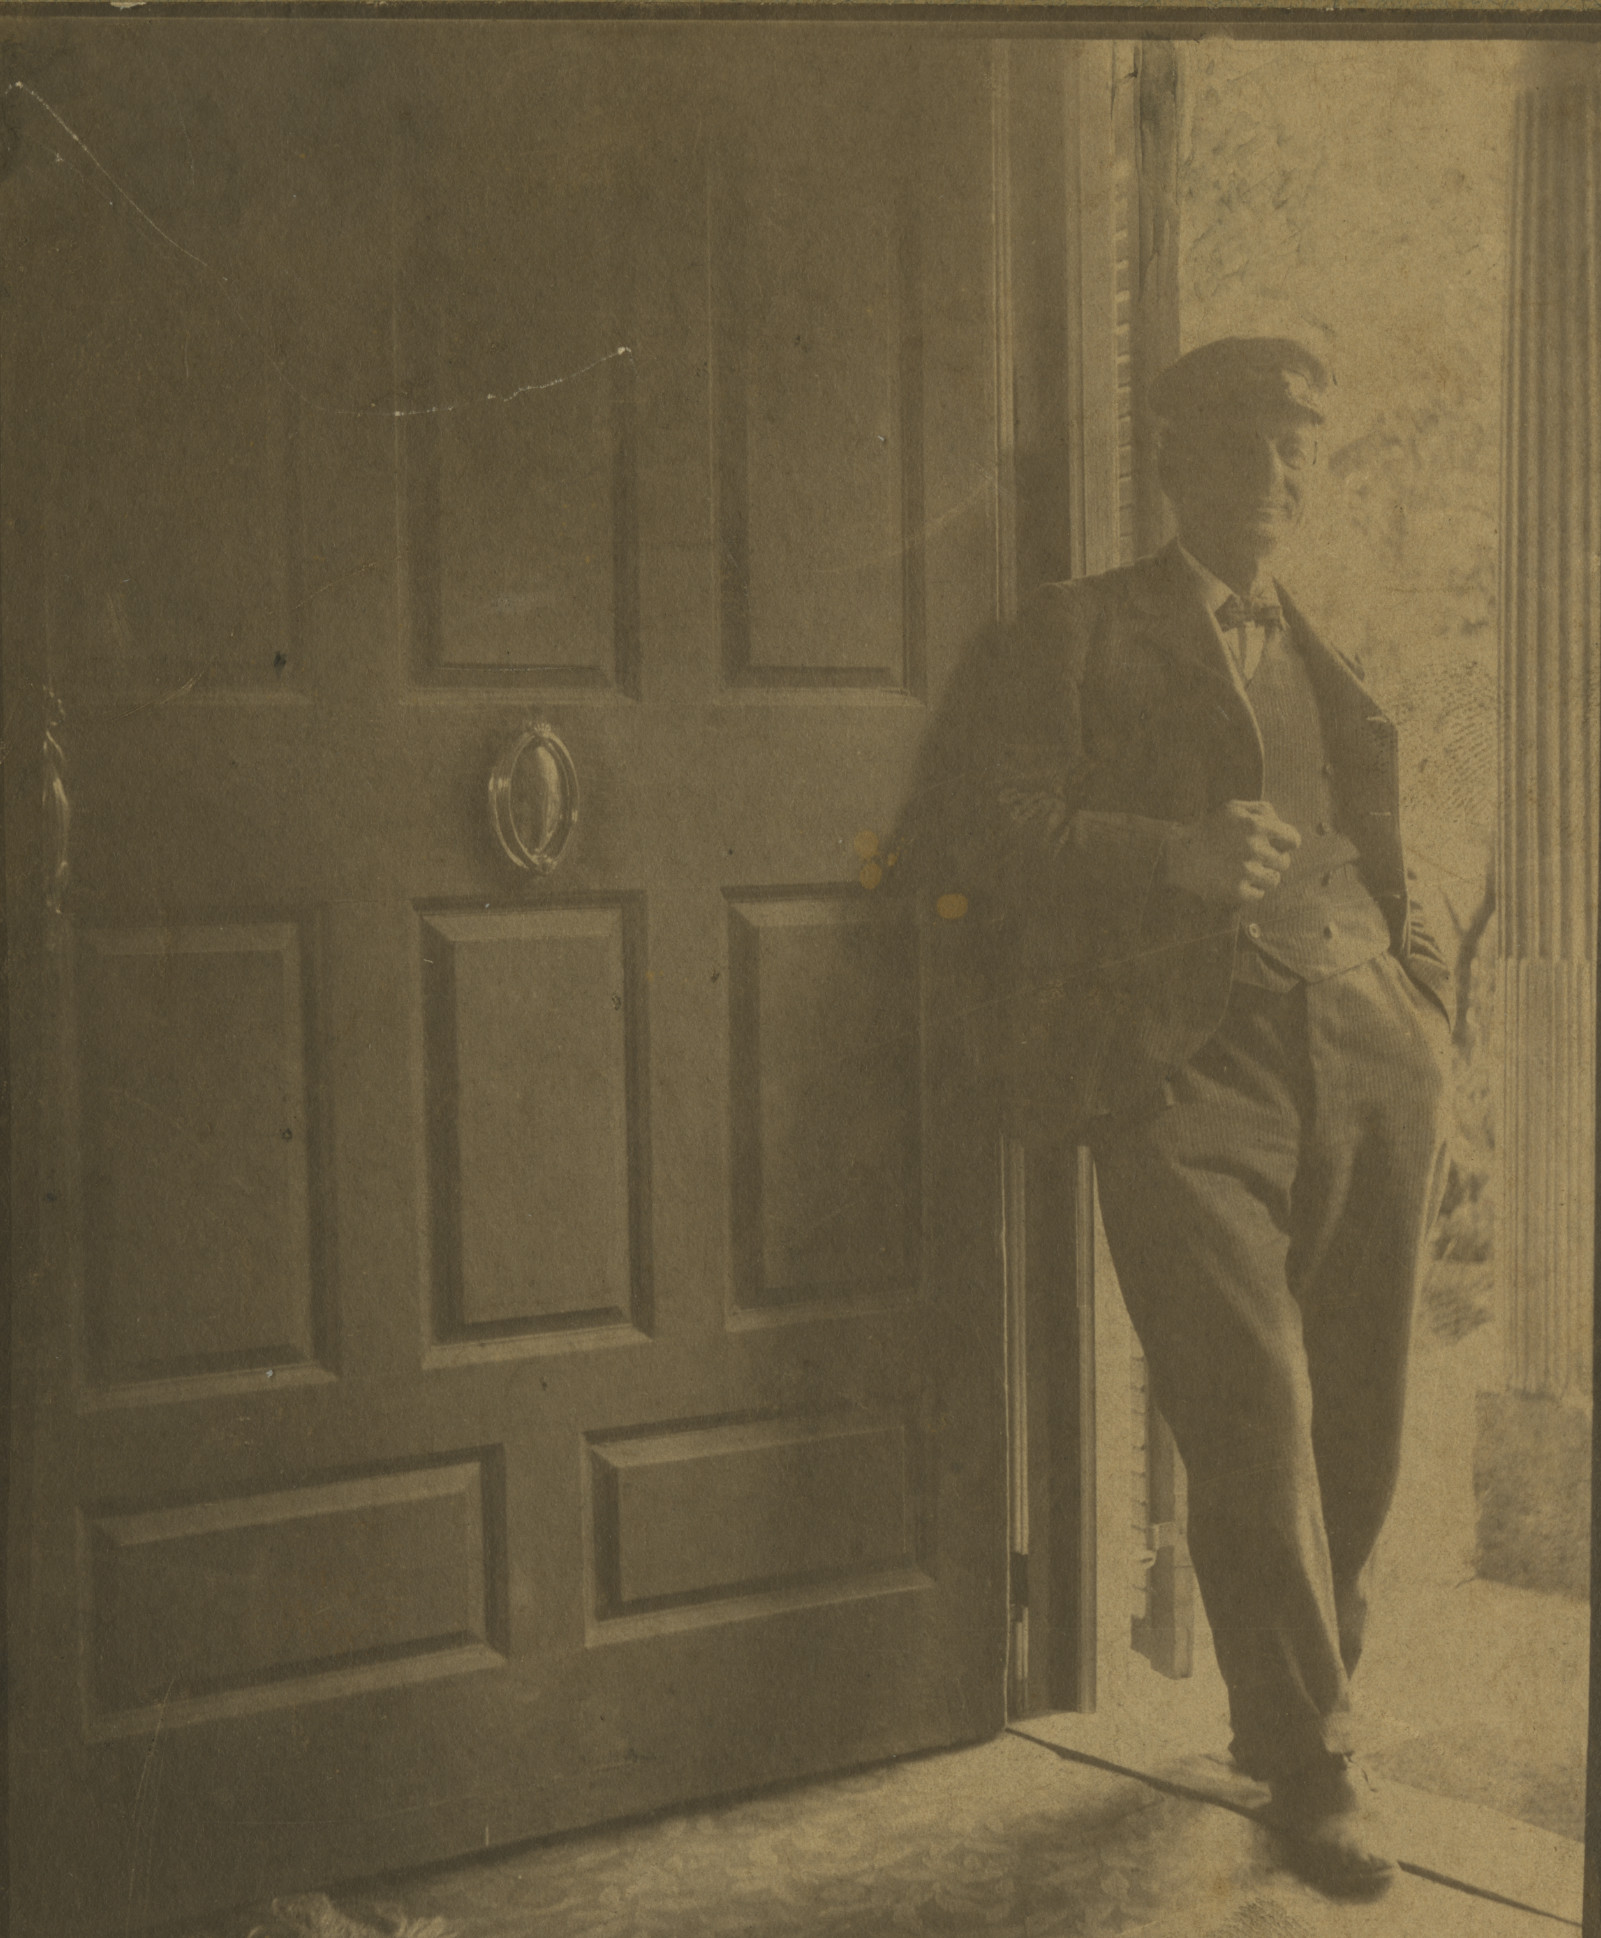 A man wearing a suit with vest, bow tie, and brimmed cap, leaning against a large, open door with a door knocker.